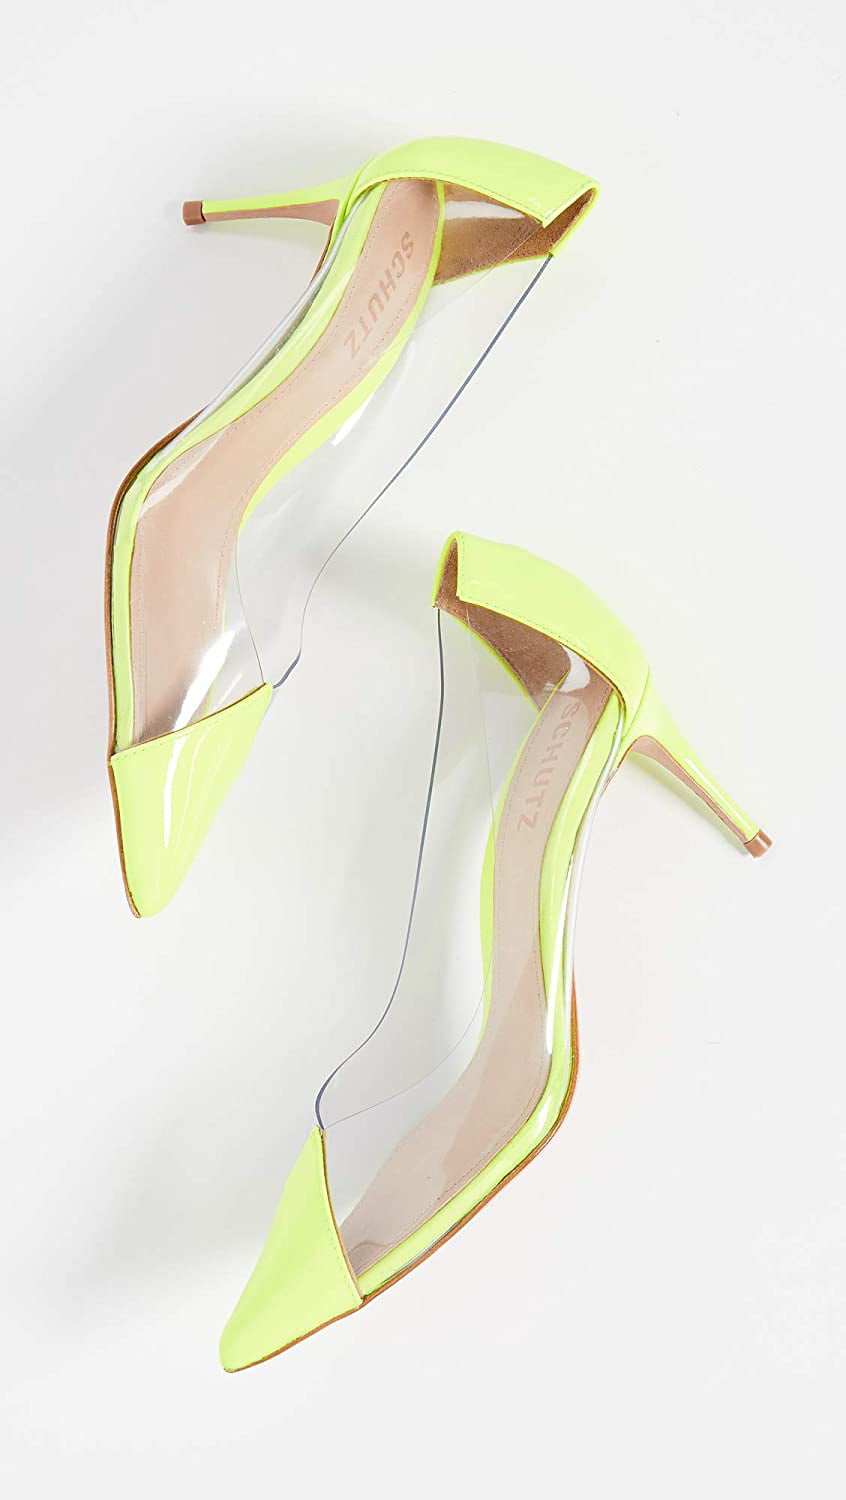 Ladies Womens Bright Fluorescent NEON Pointed Toe Court Shoes HIGH Heels  Size, Neon Yellow, 38 EU: Buy Online at Best Price in UAE - Amazon.ae